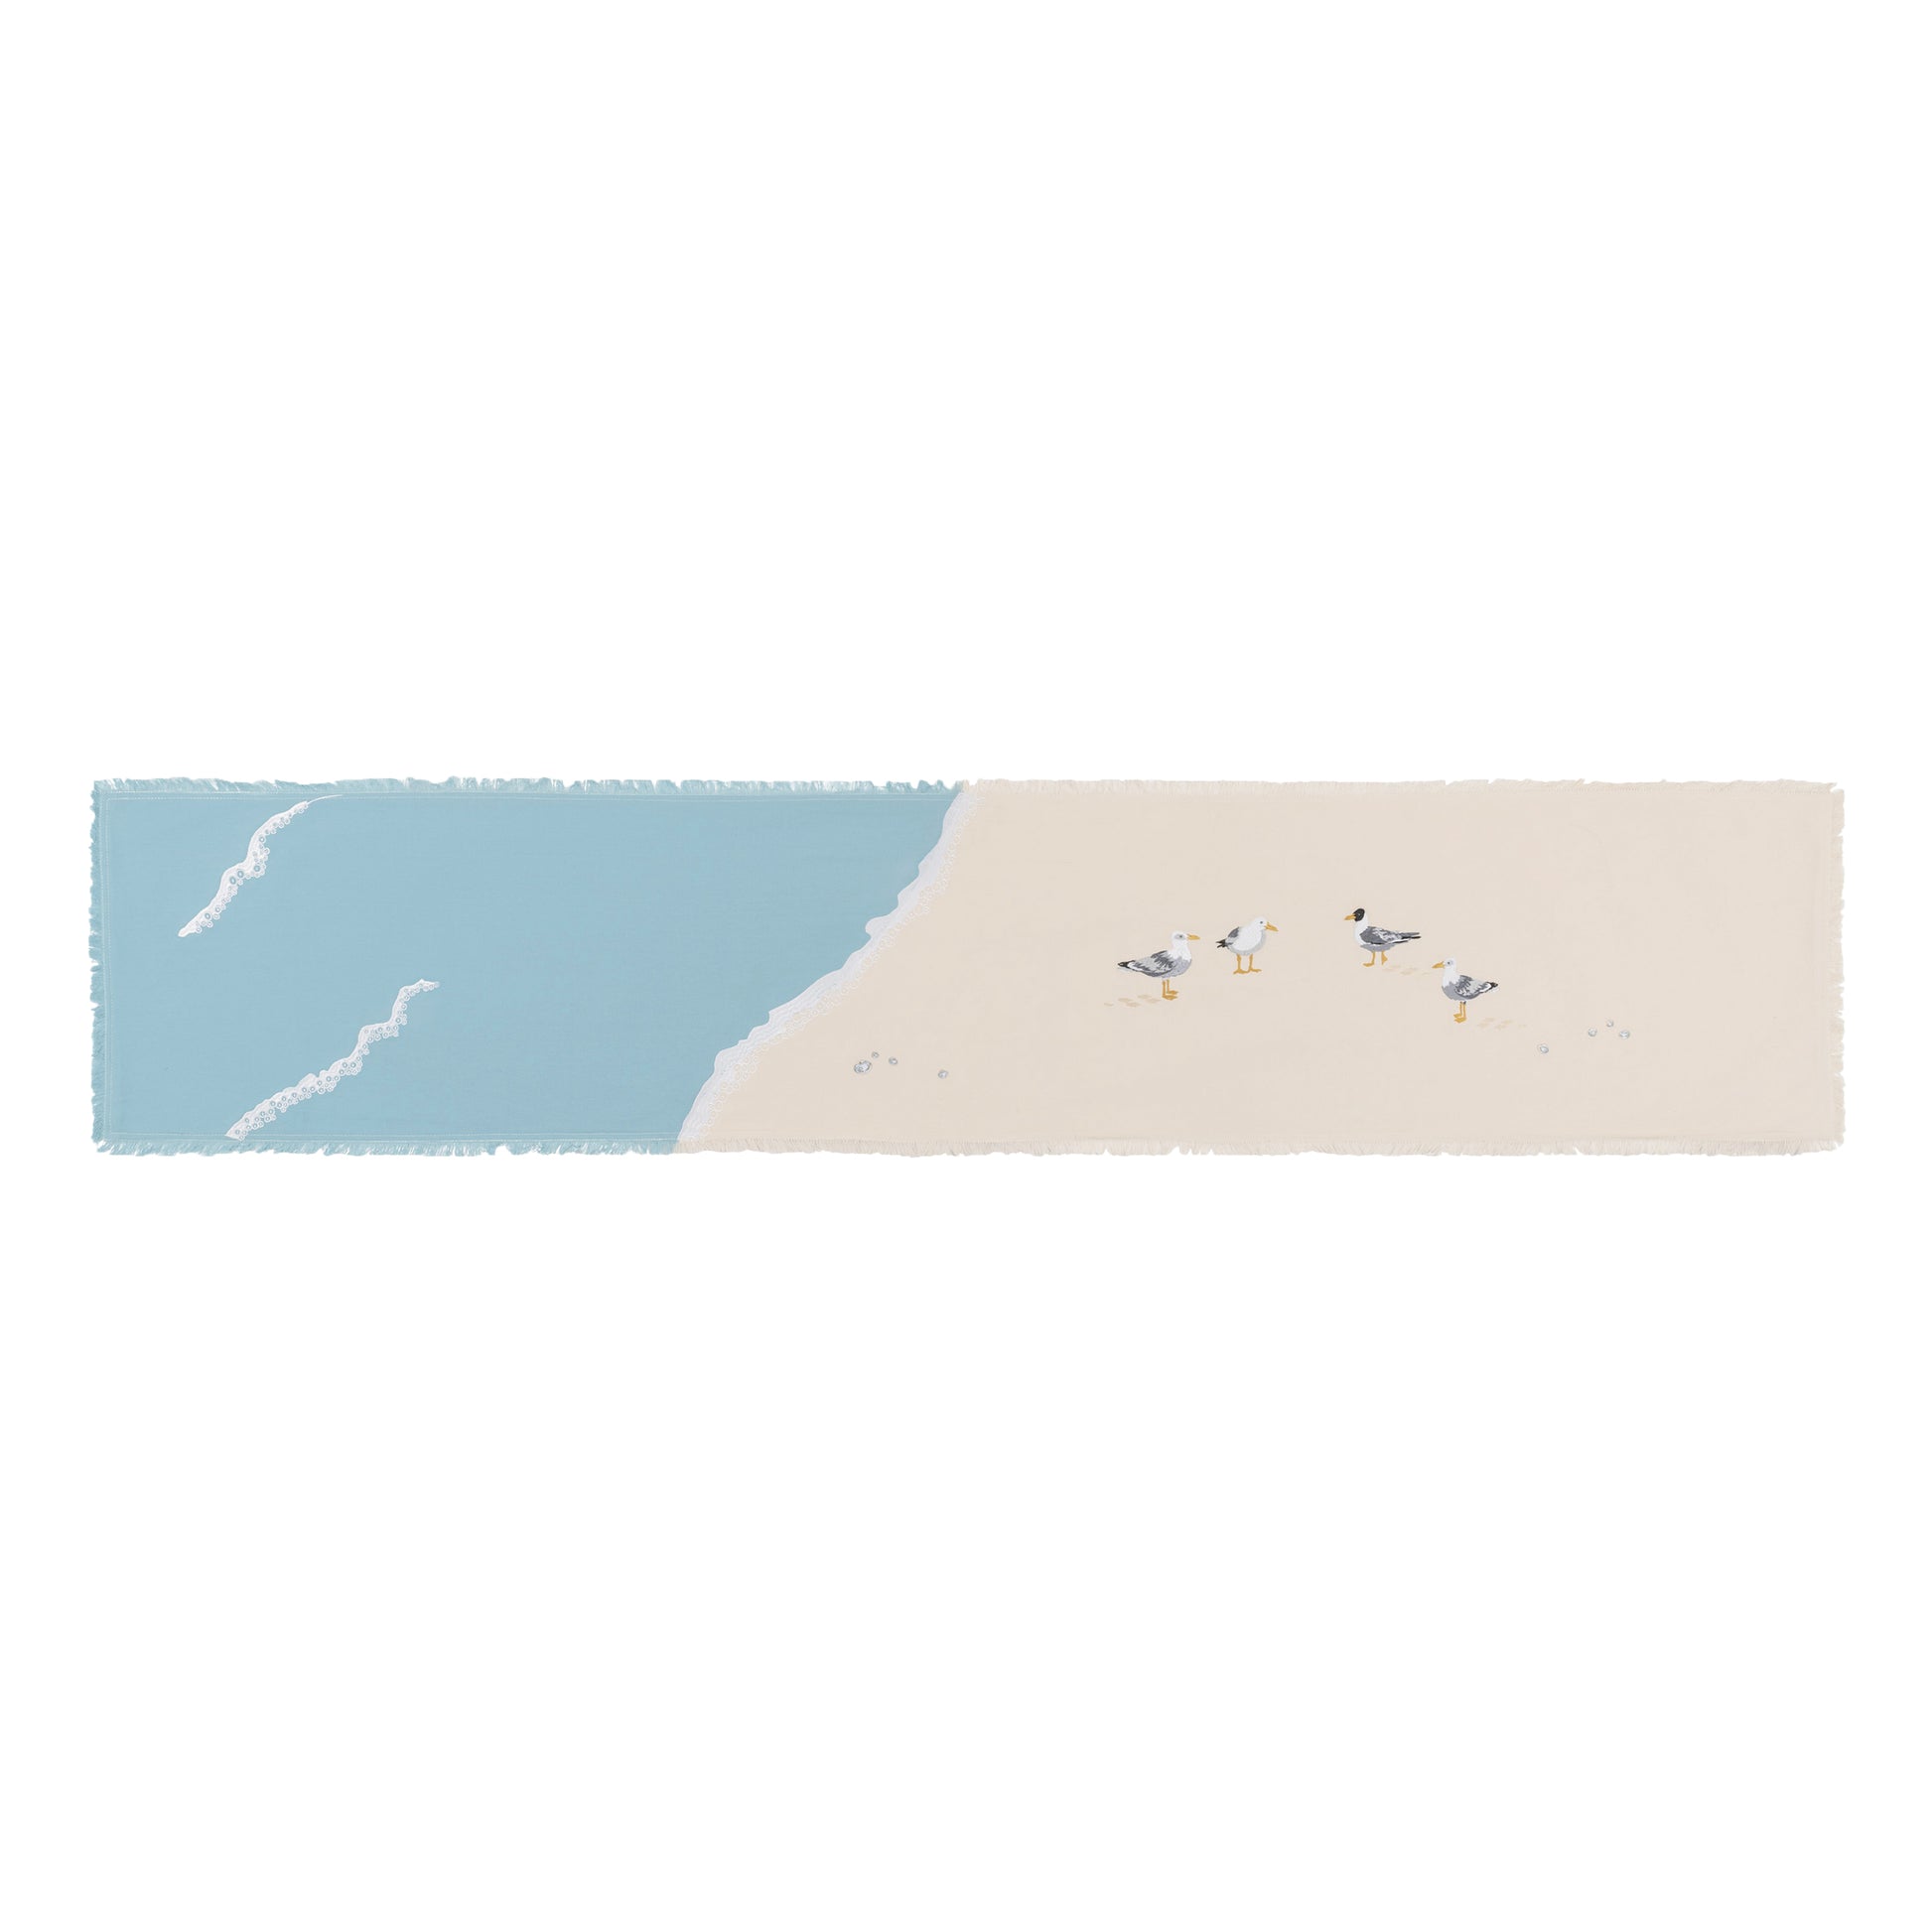 Sea gulls embroidered on a cotton fringed table runner featuring blue waves on sand.